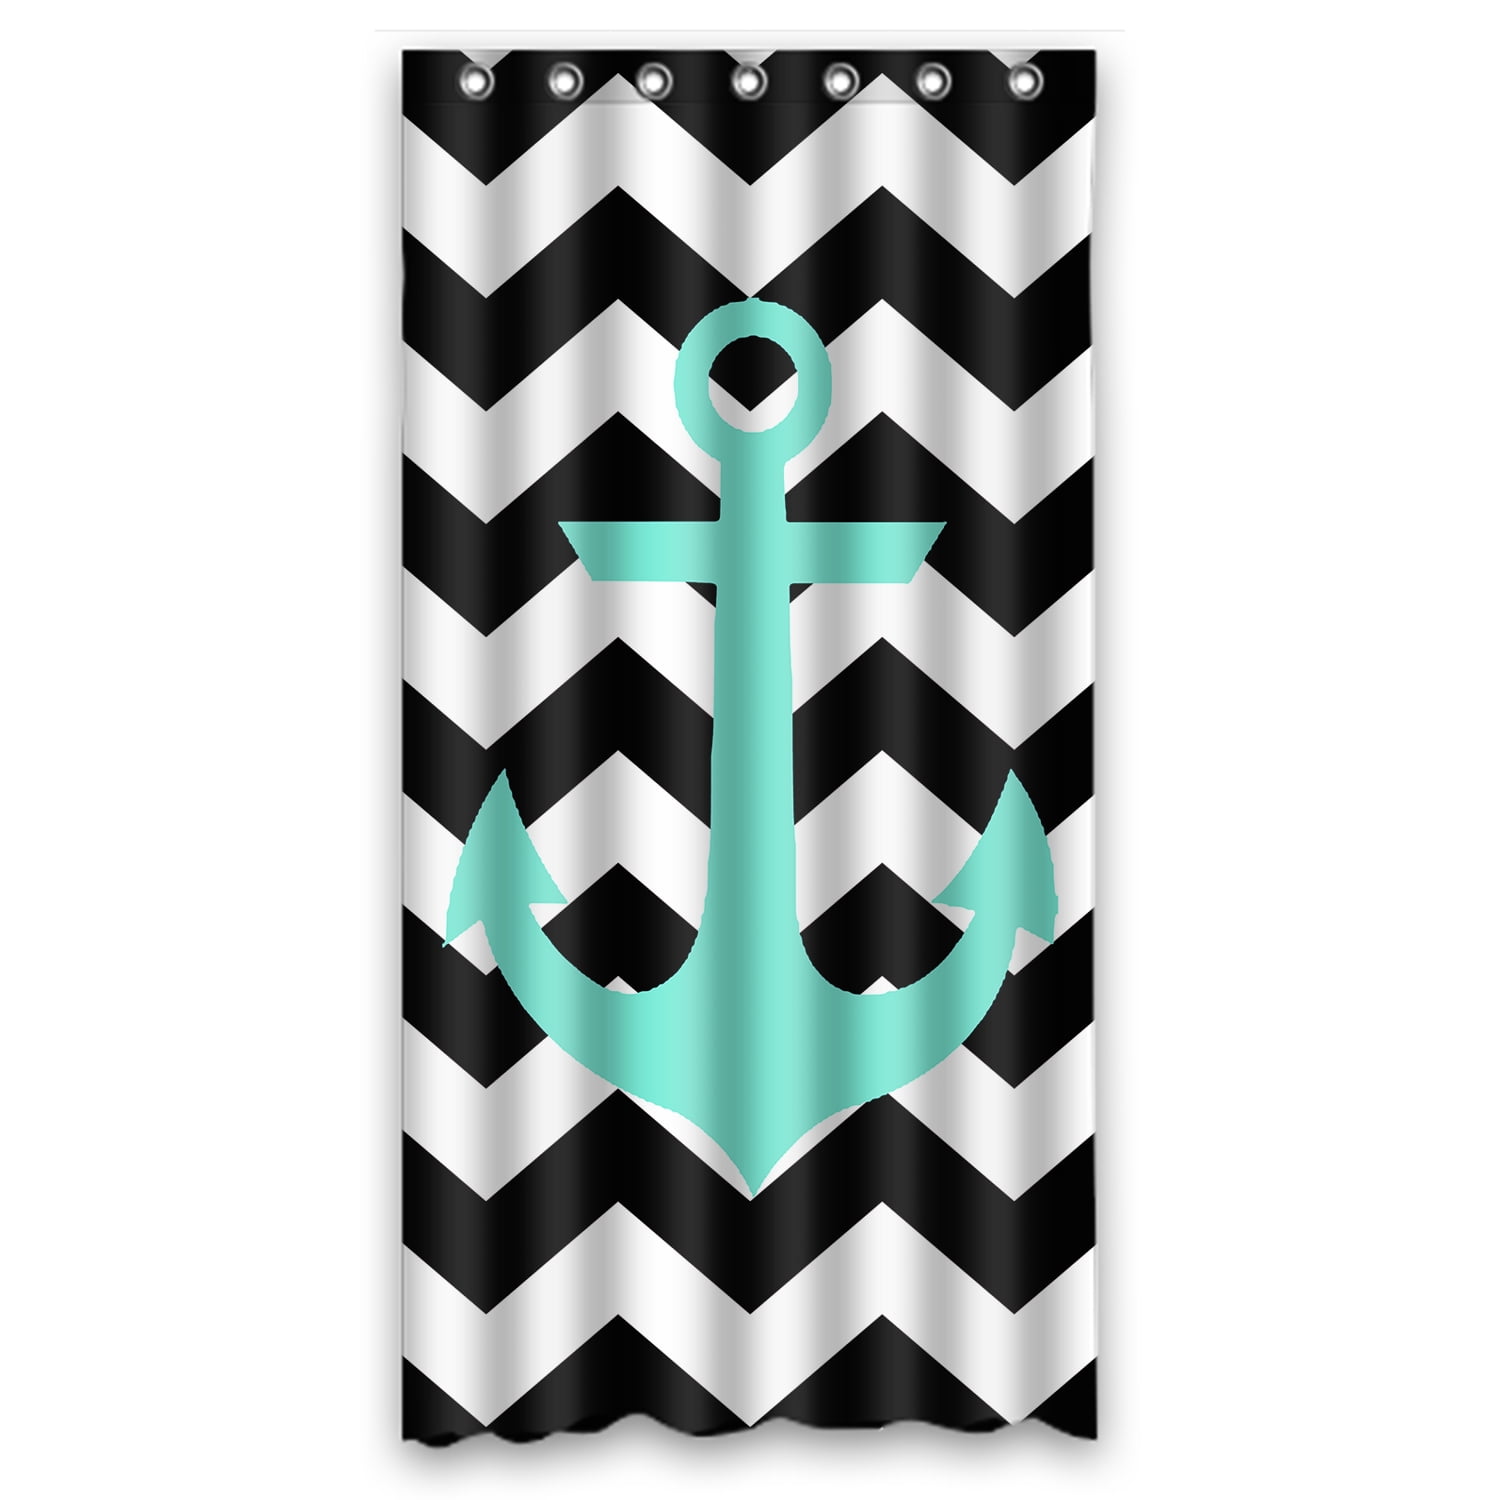 Live Love Laugh Black Wave Chevron Zig-zag Shower Curtain Liner Polyester Fabric 